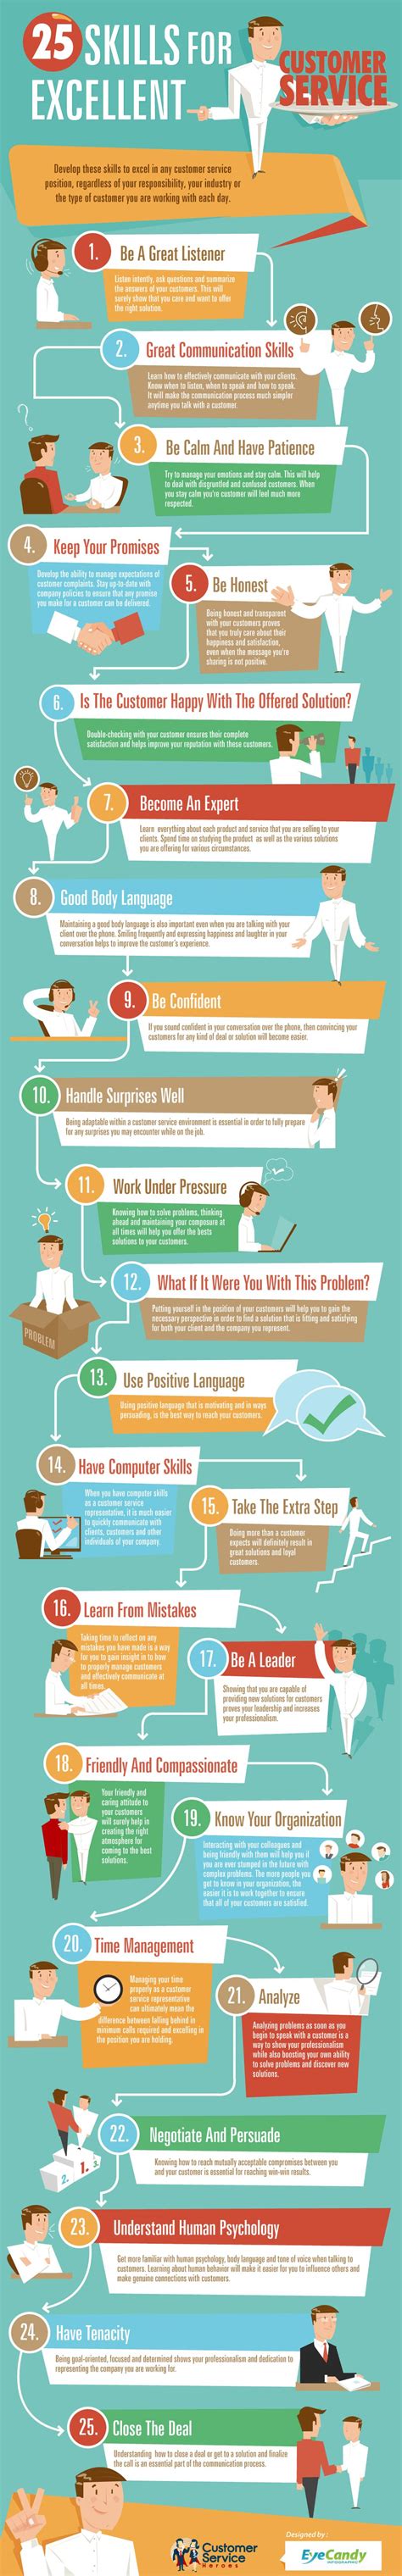 An employee with good customer service skills will wait patiently and let the customer talk until they're finished. 25 Skills for Excellent Customer Service [Infographic ...